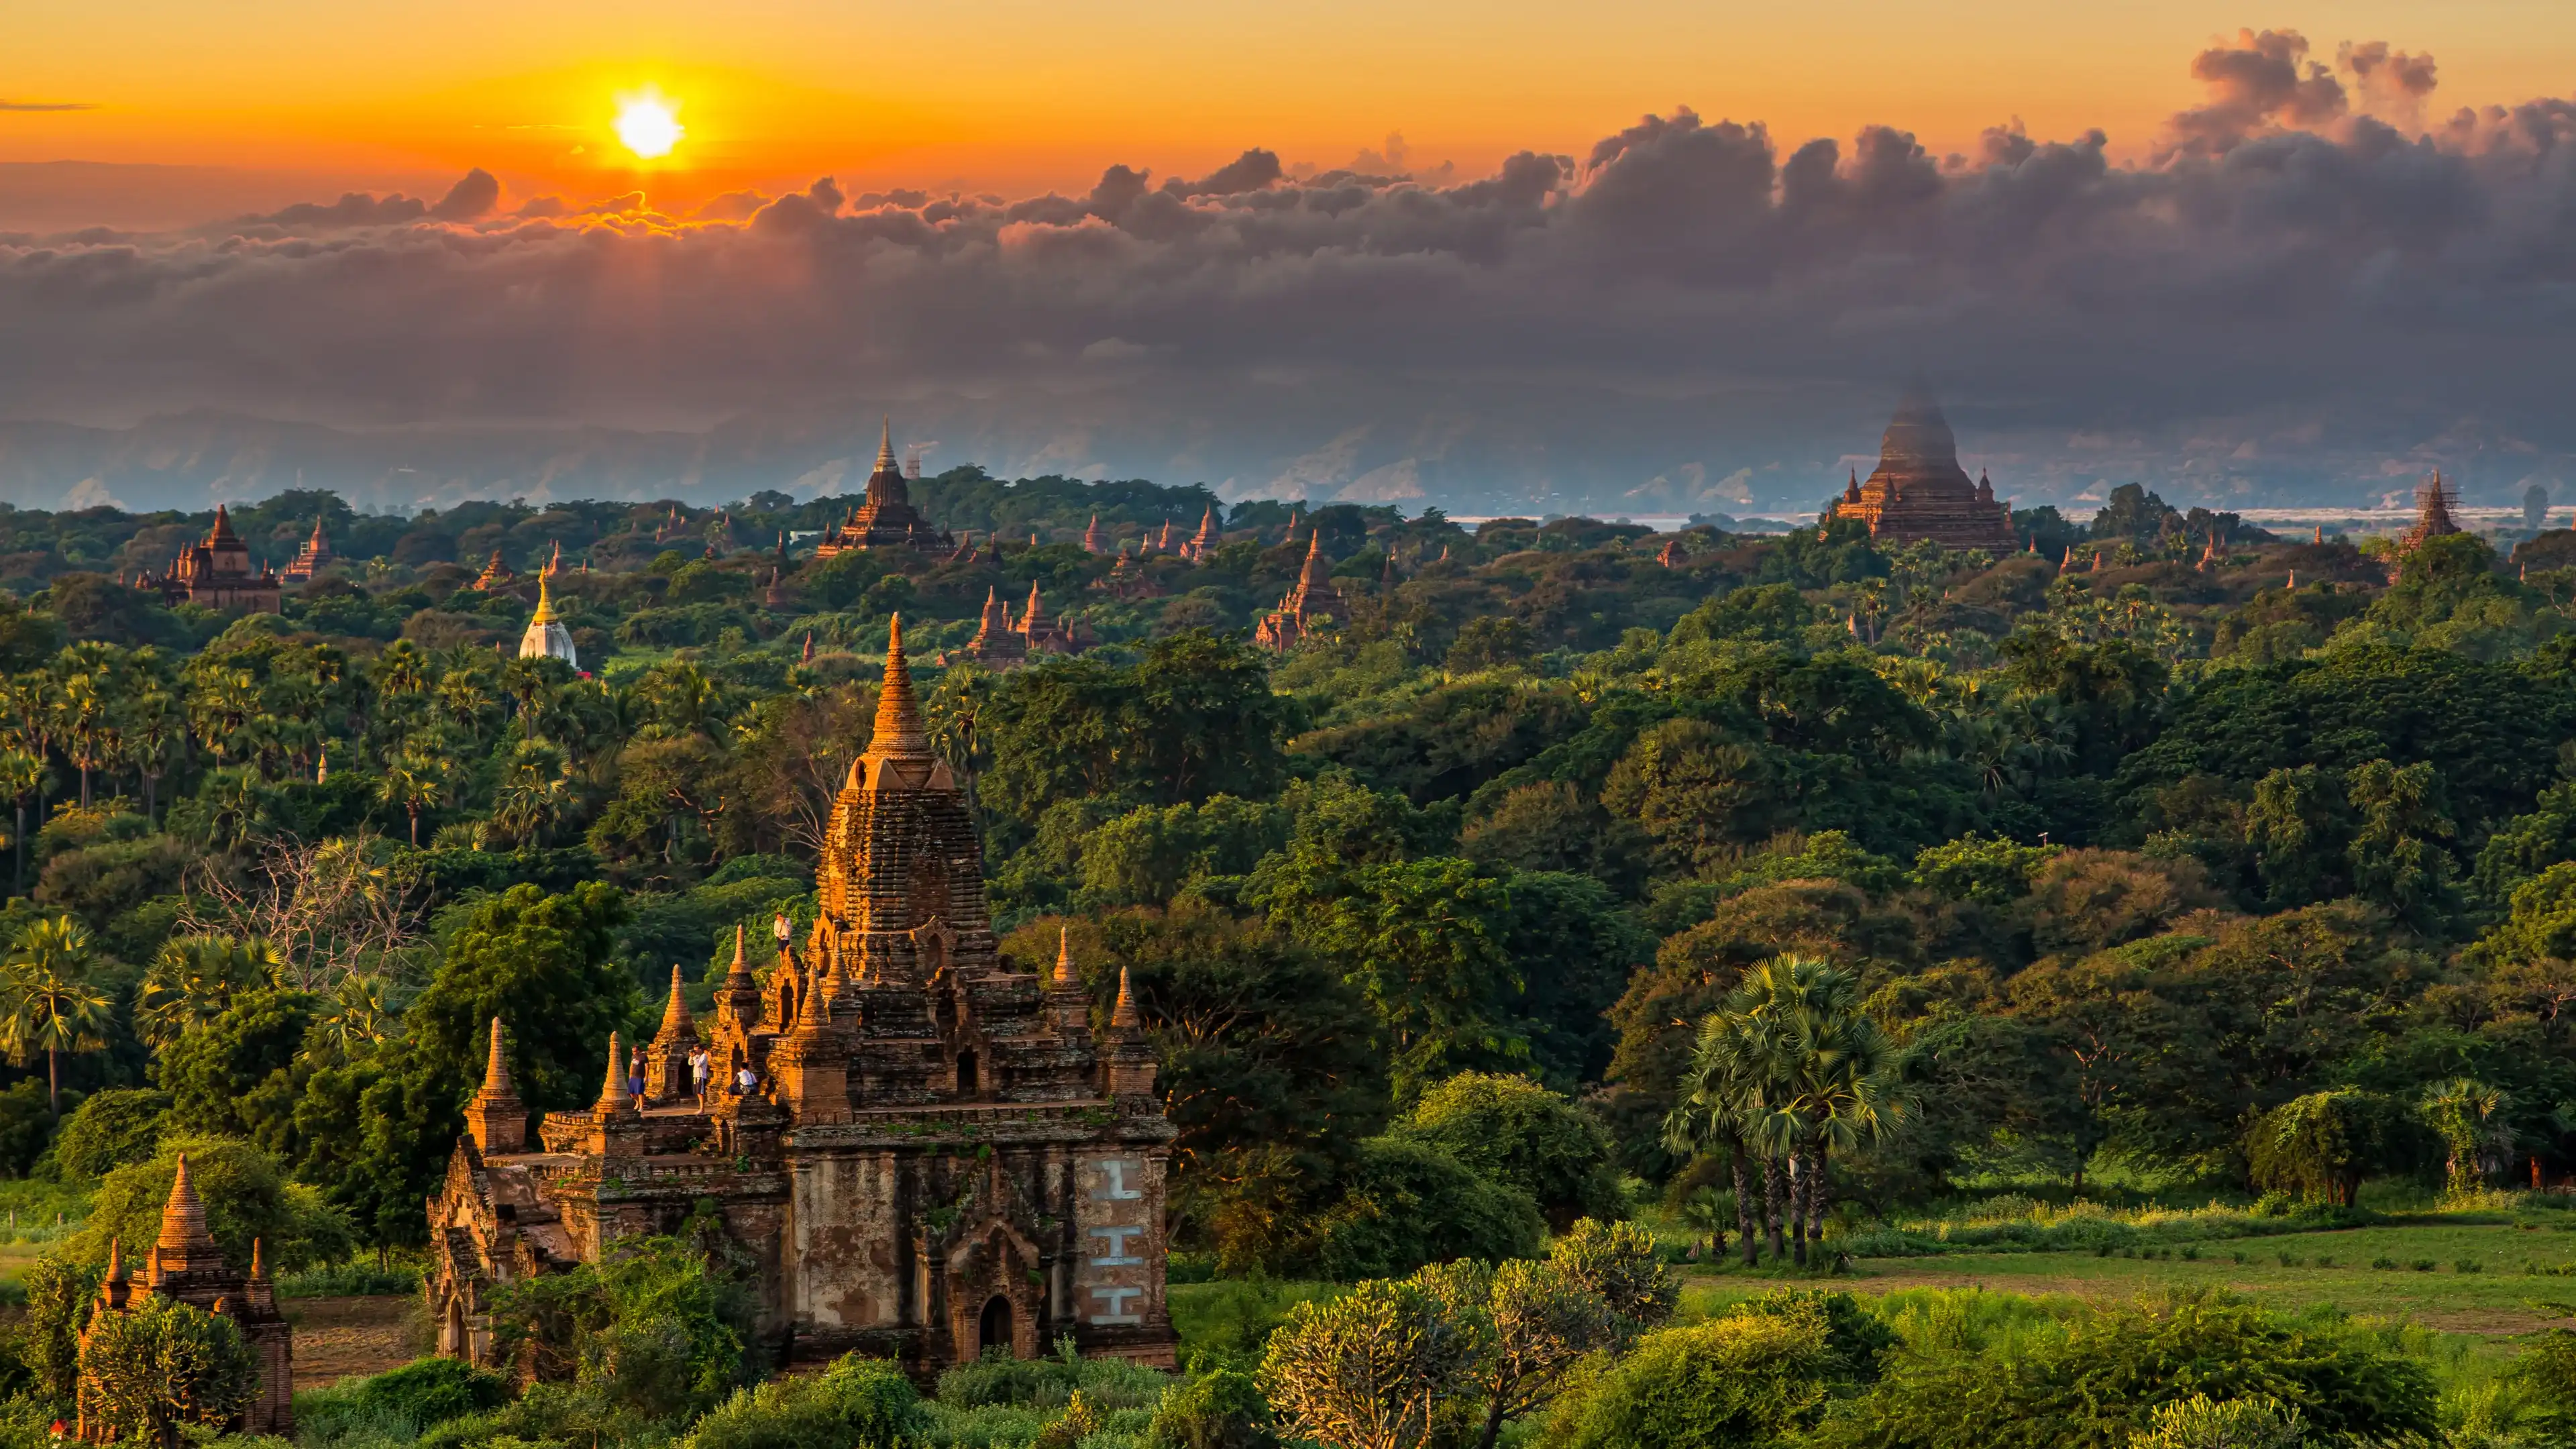 Asian ancient architecture archaeology temple in Bagan at sunset, Myanmar ananda temples in the Bagan Archaeological Zone Pagodas and temples of Bagan world heritage site, Myanmar, Asia.